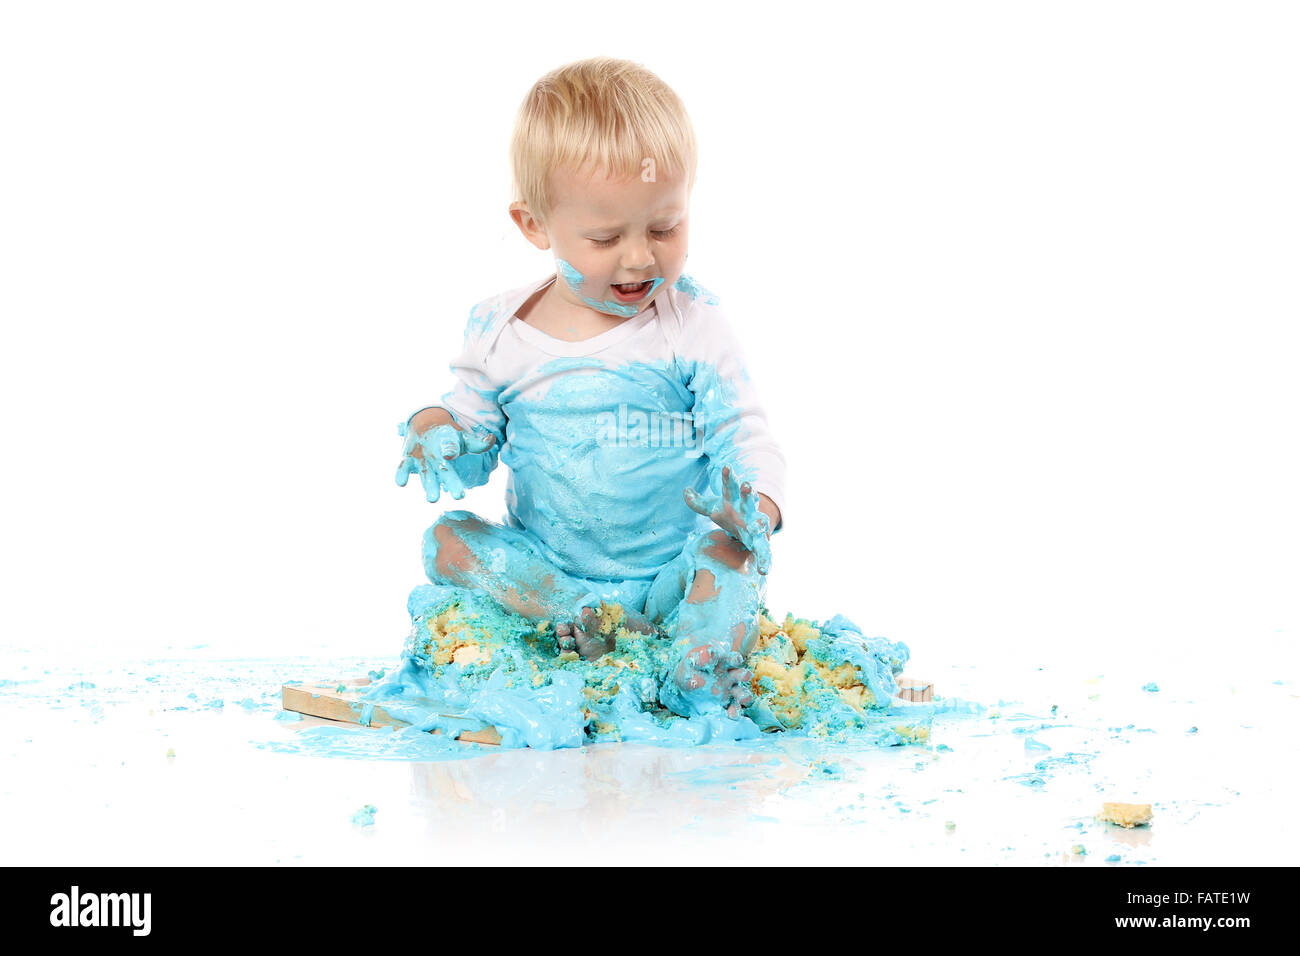 A one year old baby boy smashing a blue iced birthday cake on a wooden board. Image is isolated on a white background. Stock Photo